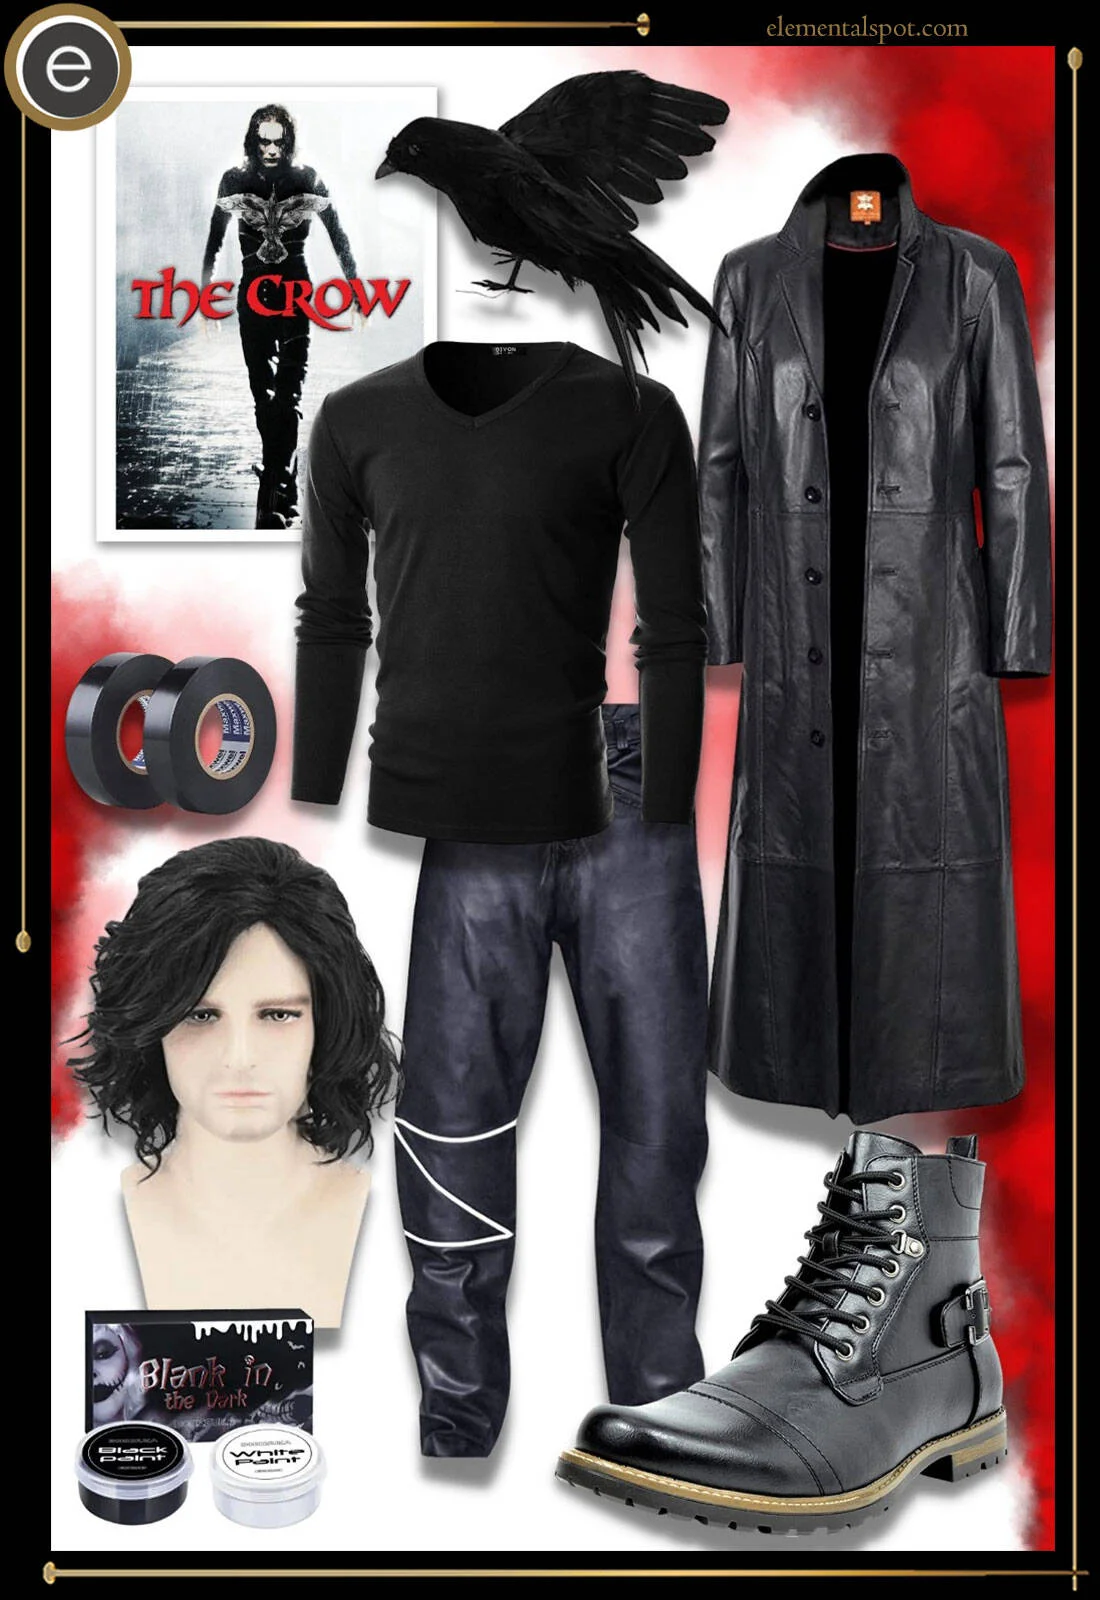 Dress Up Like Eric Draven from The Crow - Elemental Spot